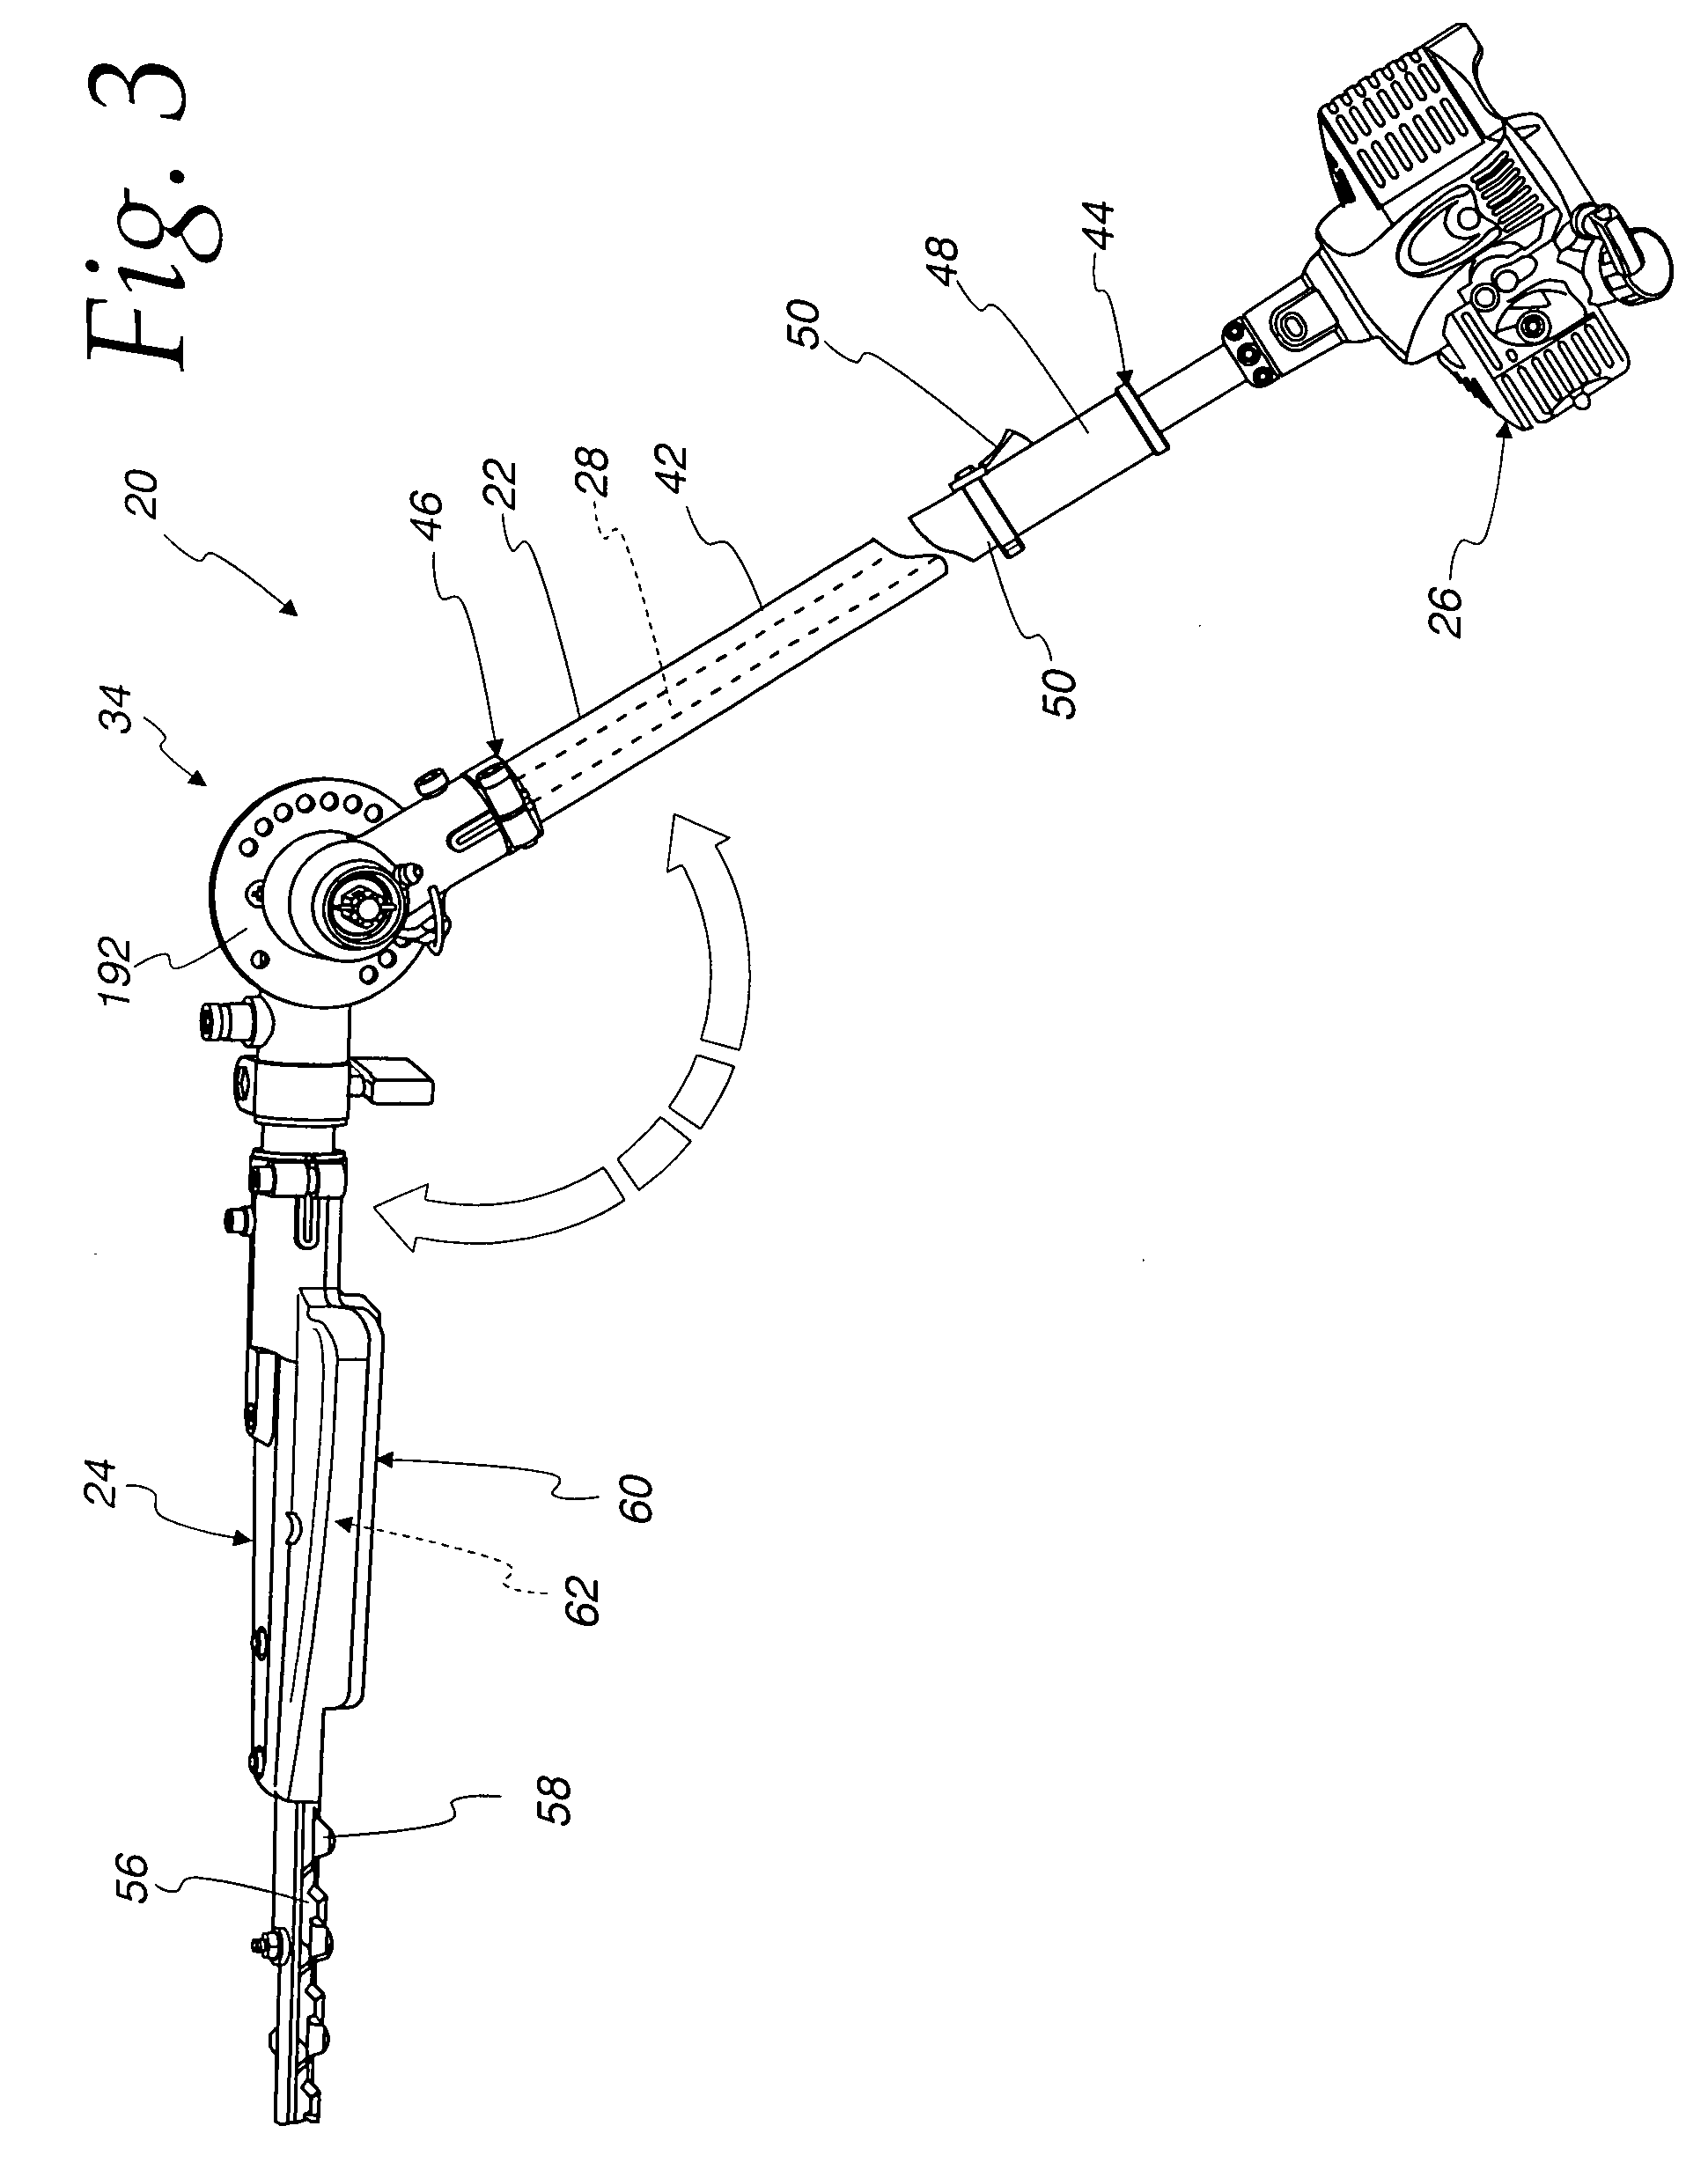 Reconfigurable portable powered tool and method of reconfiguring such a tool